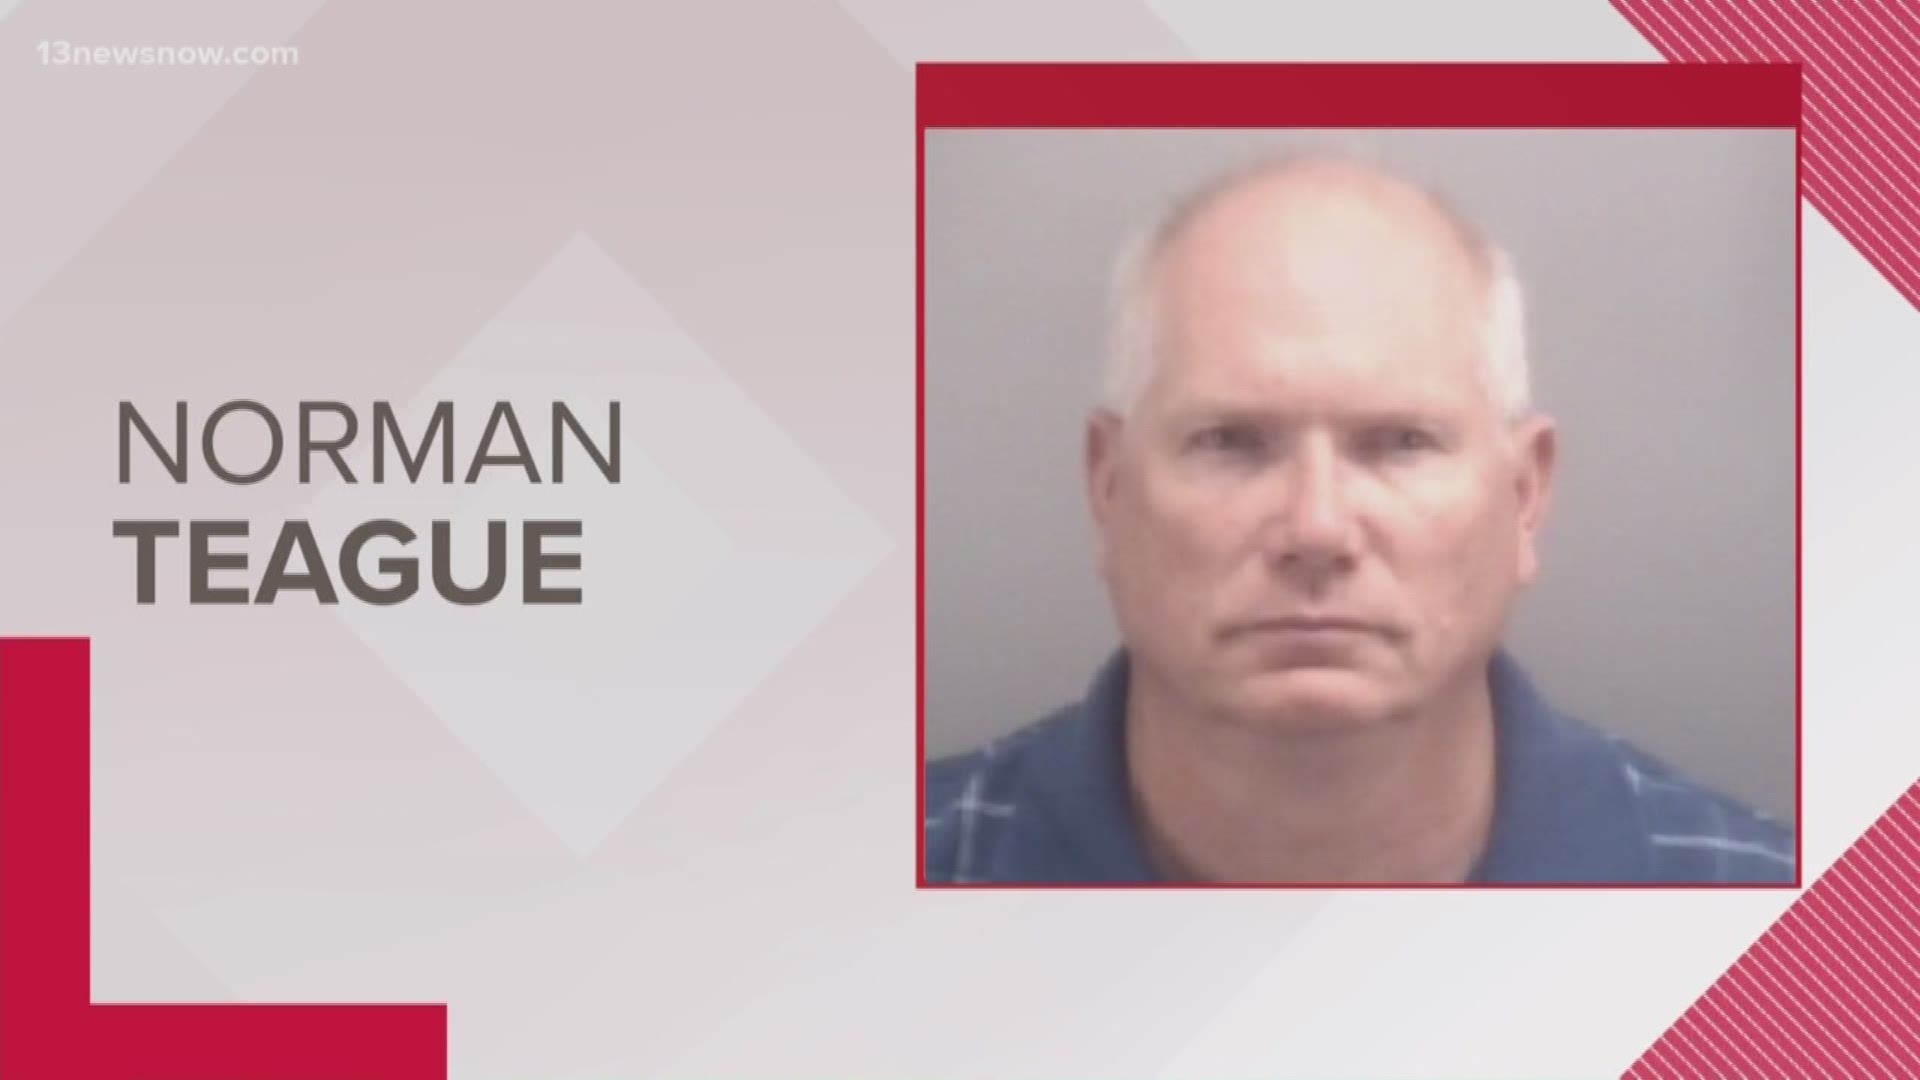 Virginia Beach police officer Norman Teague faces two counts of forging a public record. He's on administrative duty pending the outcome of the investigation.